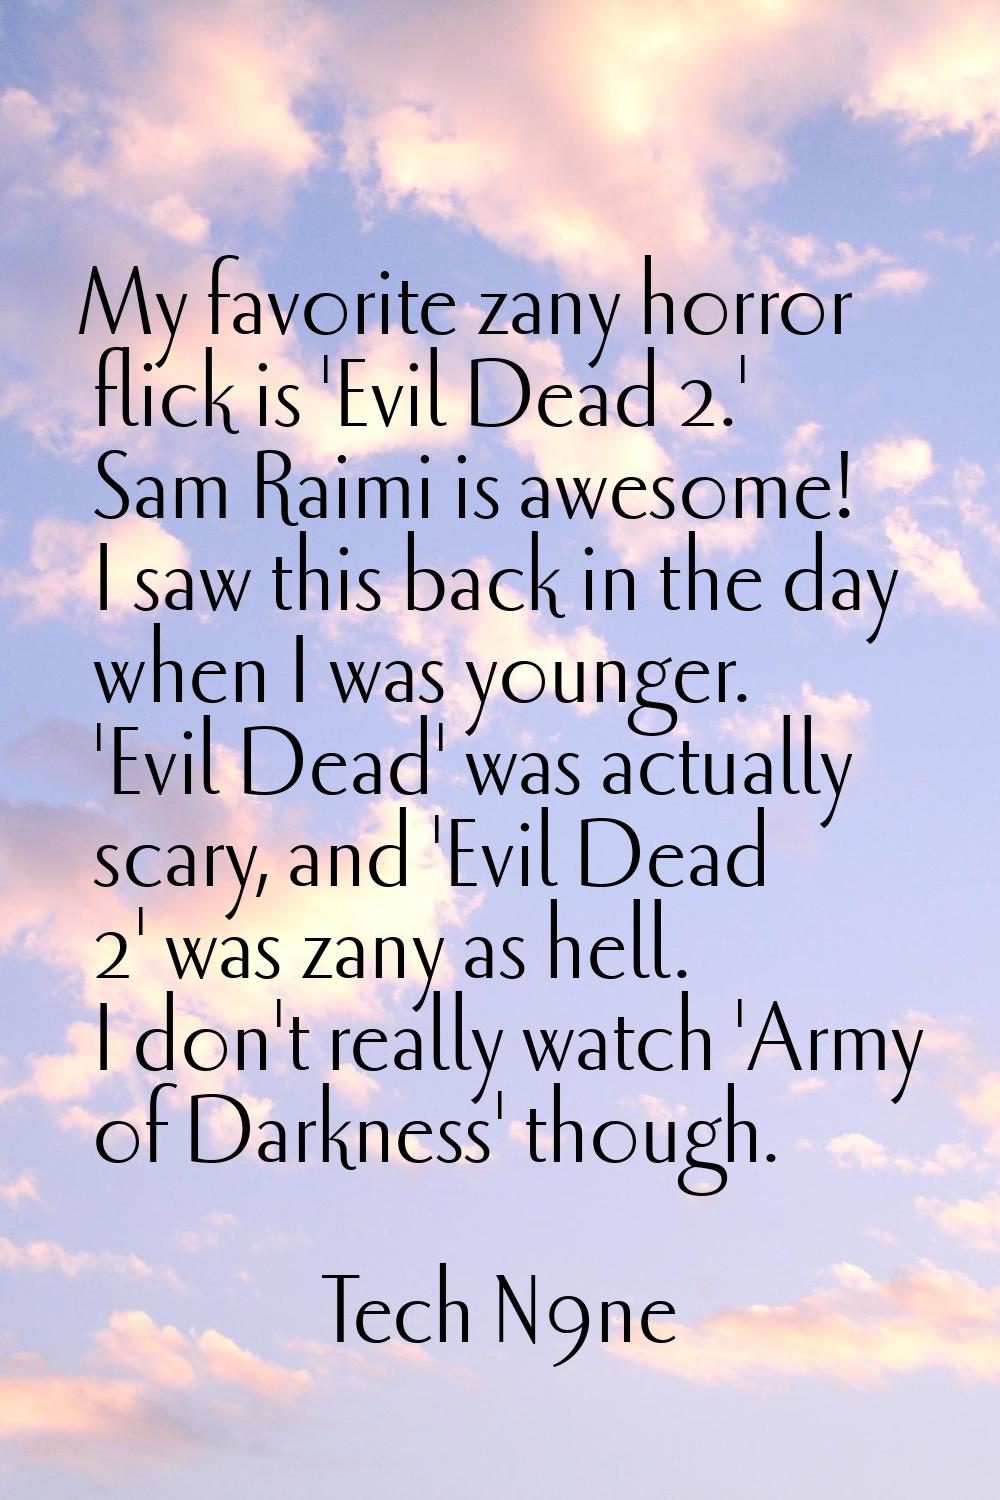 My favorite zany horror flick is 'Evil Dead 2.' Sam Raimi is awesome! I saw this back in the day wh